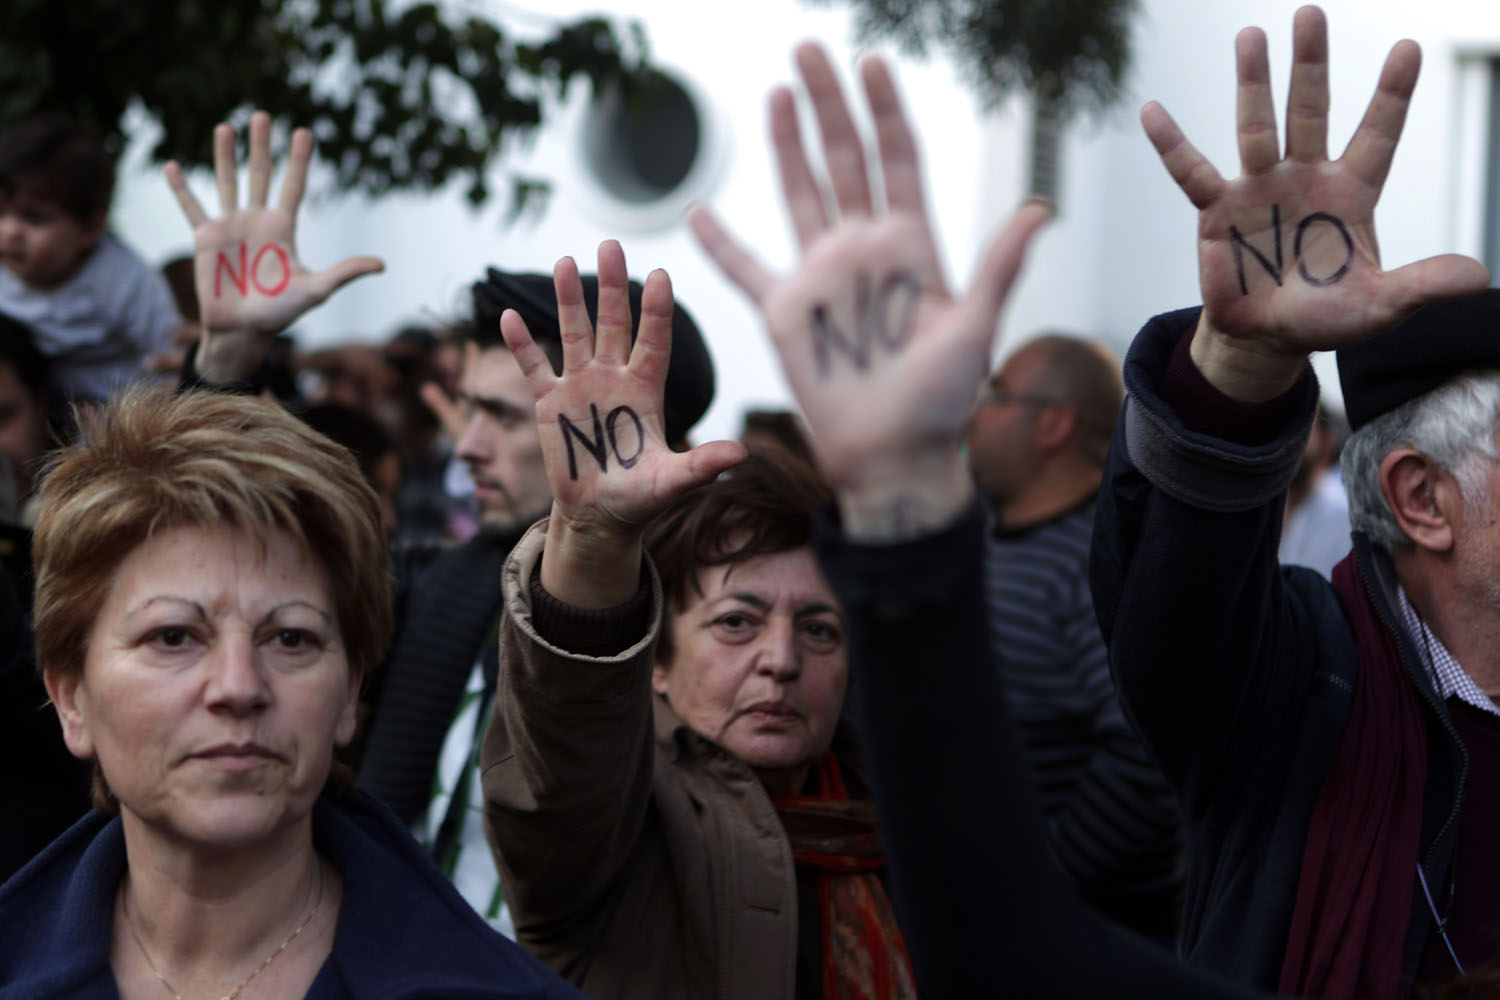 Cypriots show their palms reading "No" during a protest against an EU bailout deal outside the parliament in Nicosia.